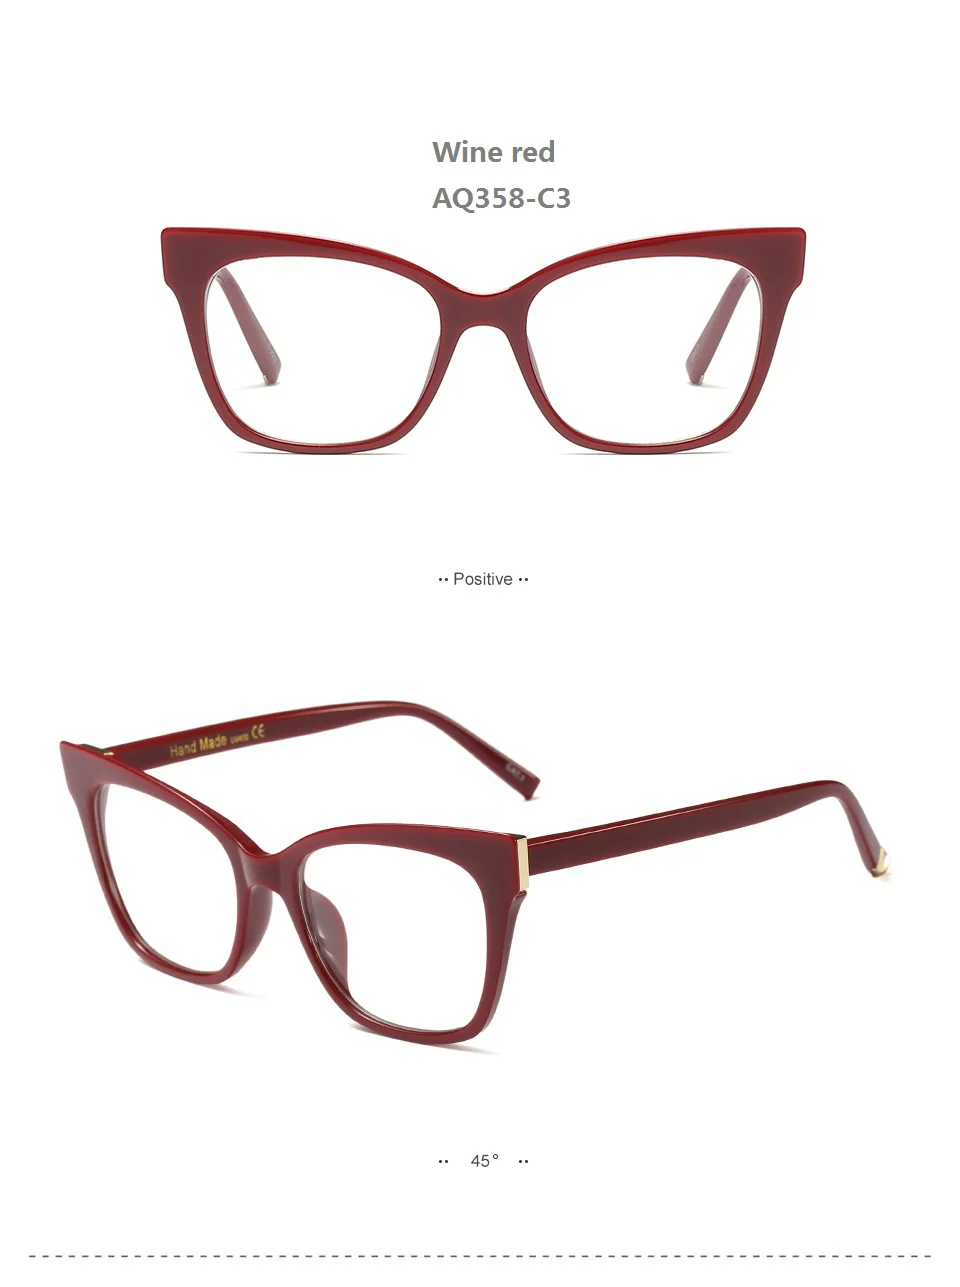 Women Fashion Concise Oversized Frame Cat Eye Light Cosy Reading Glasses Presbyopia 0.5 1.0 1.5 2.0 2.5 3.0 3.5 4.0 Diopter - Цвет оправы: AQ358-C3